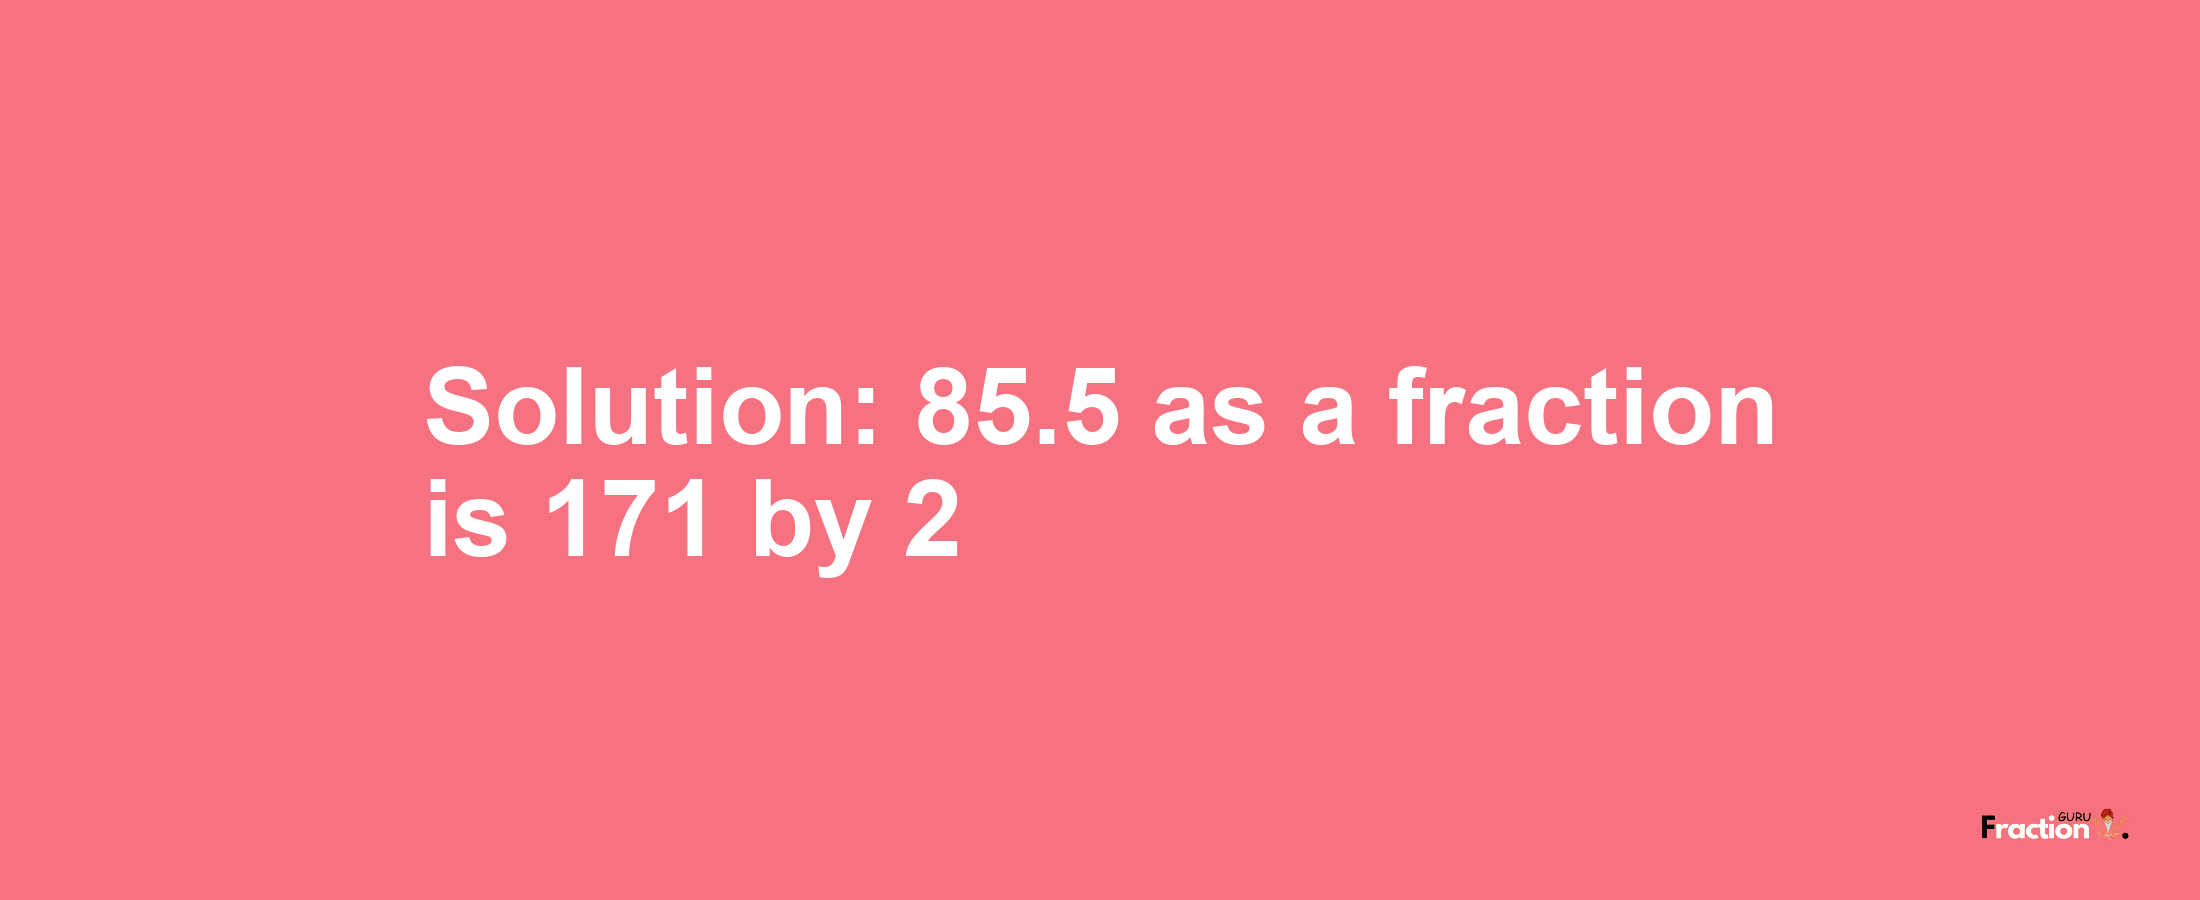 Solution:85.5 as a fraction is 171/2